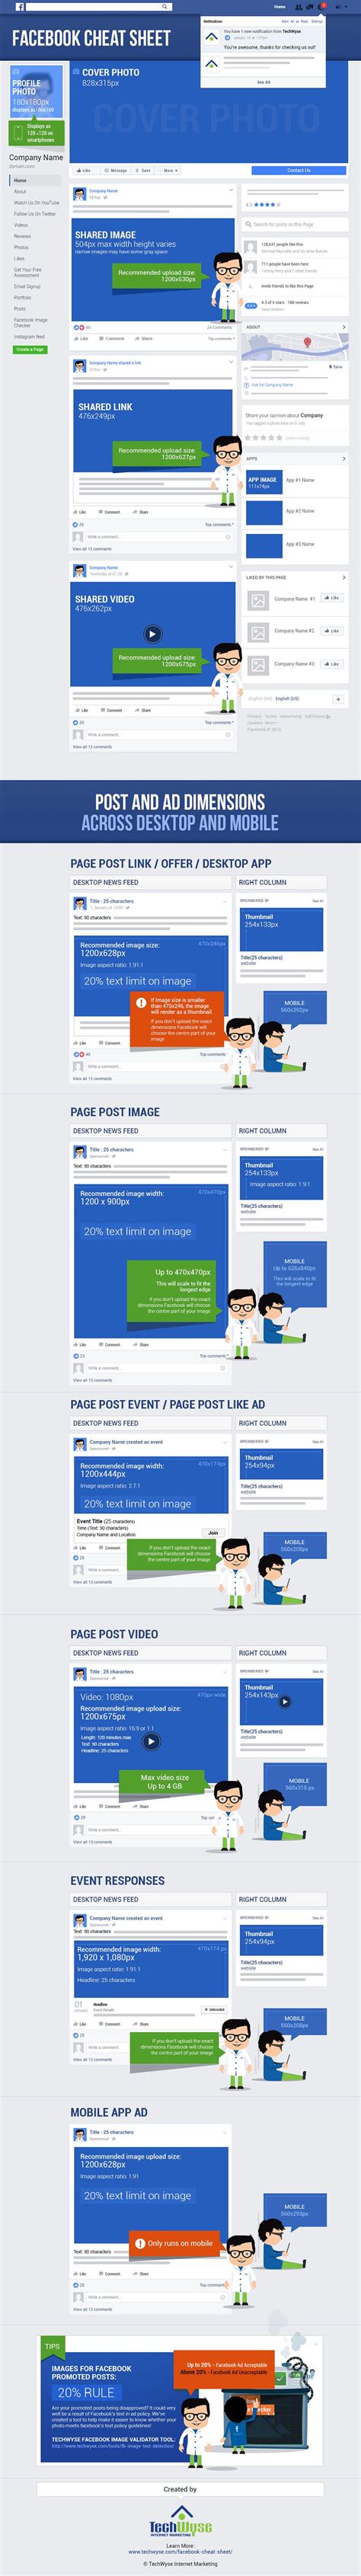 The Complete Facebook Image Sizes And Dimensions Guide Infographic